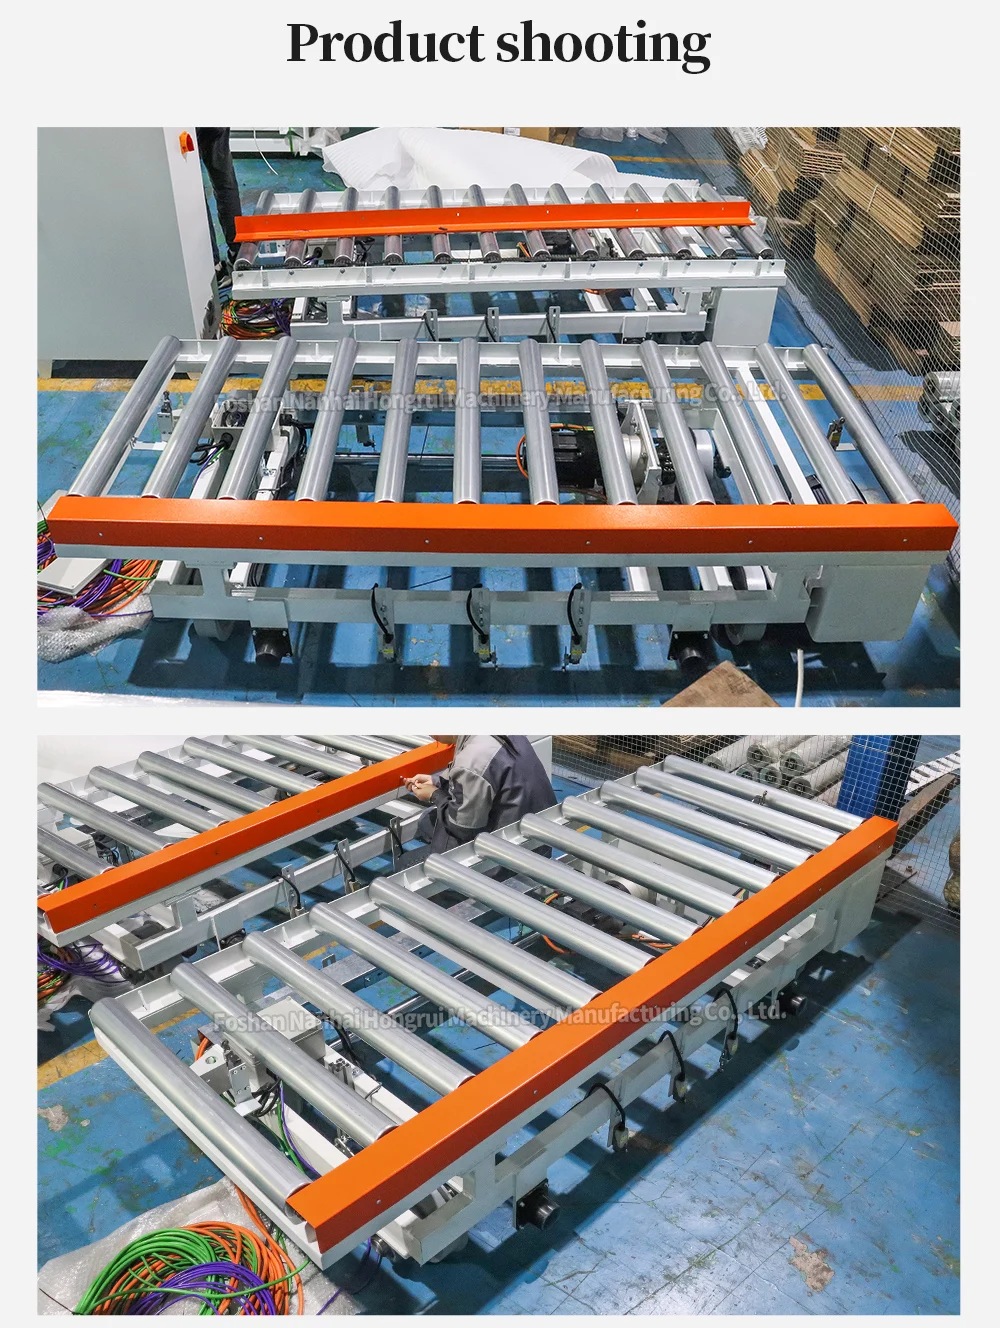 Efficiency Boost Rail Guided Vehicles for Streamlined Material Handling Operations factory